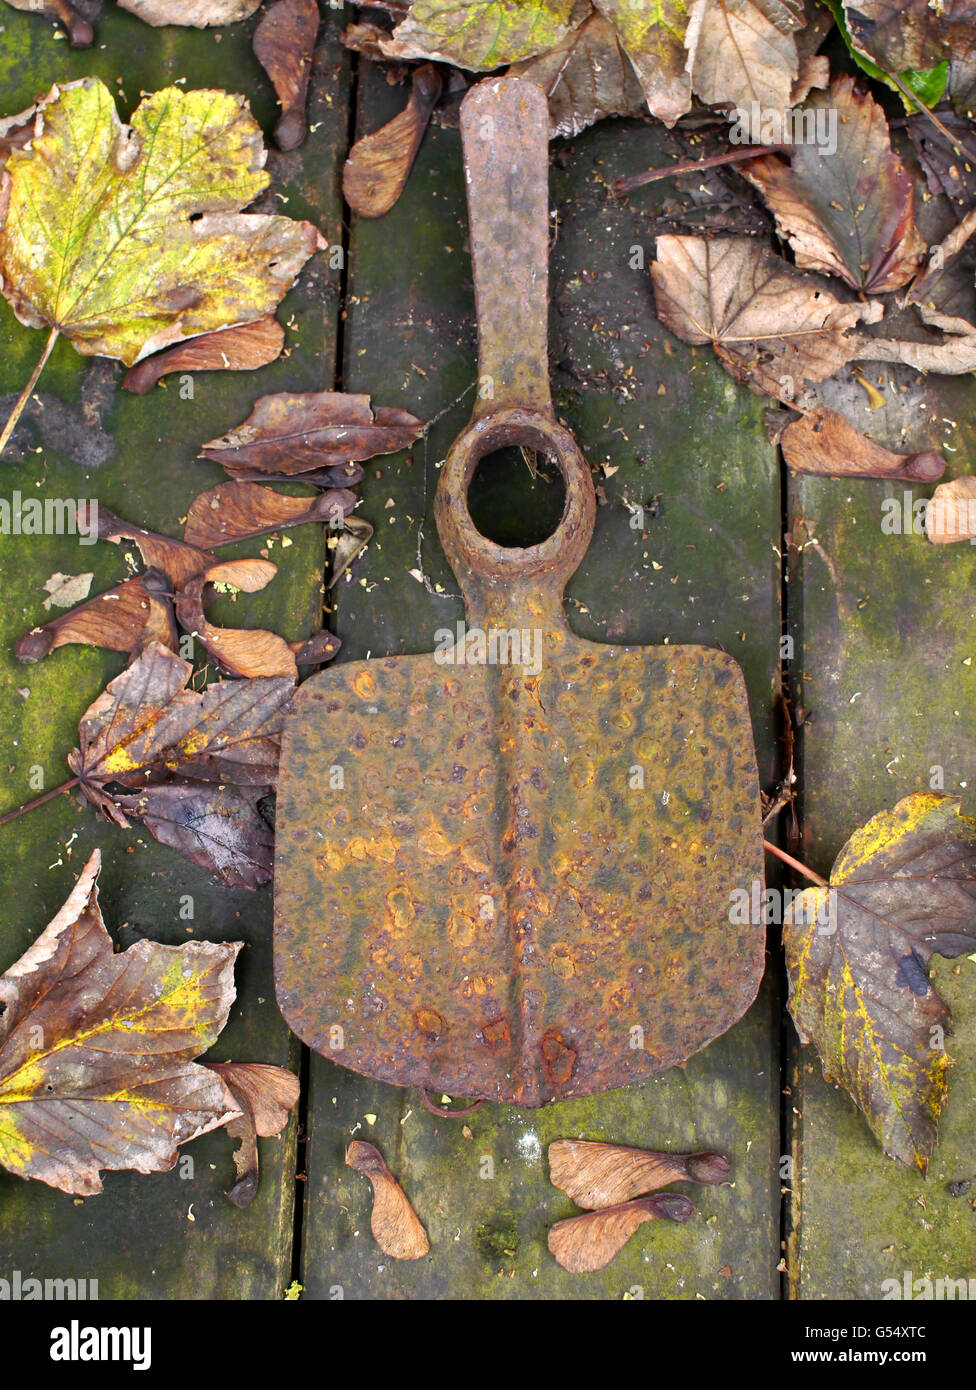 old garden tool on decking with autumn leaves Stock Photo